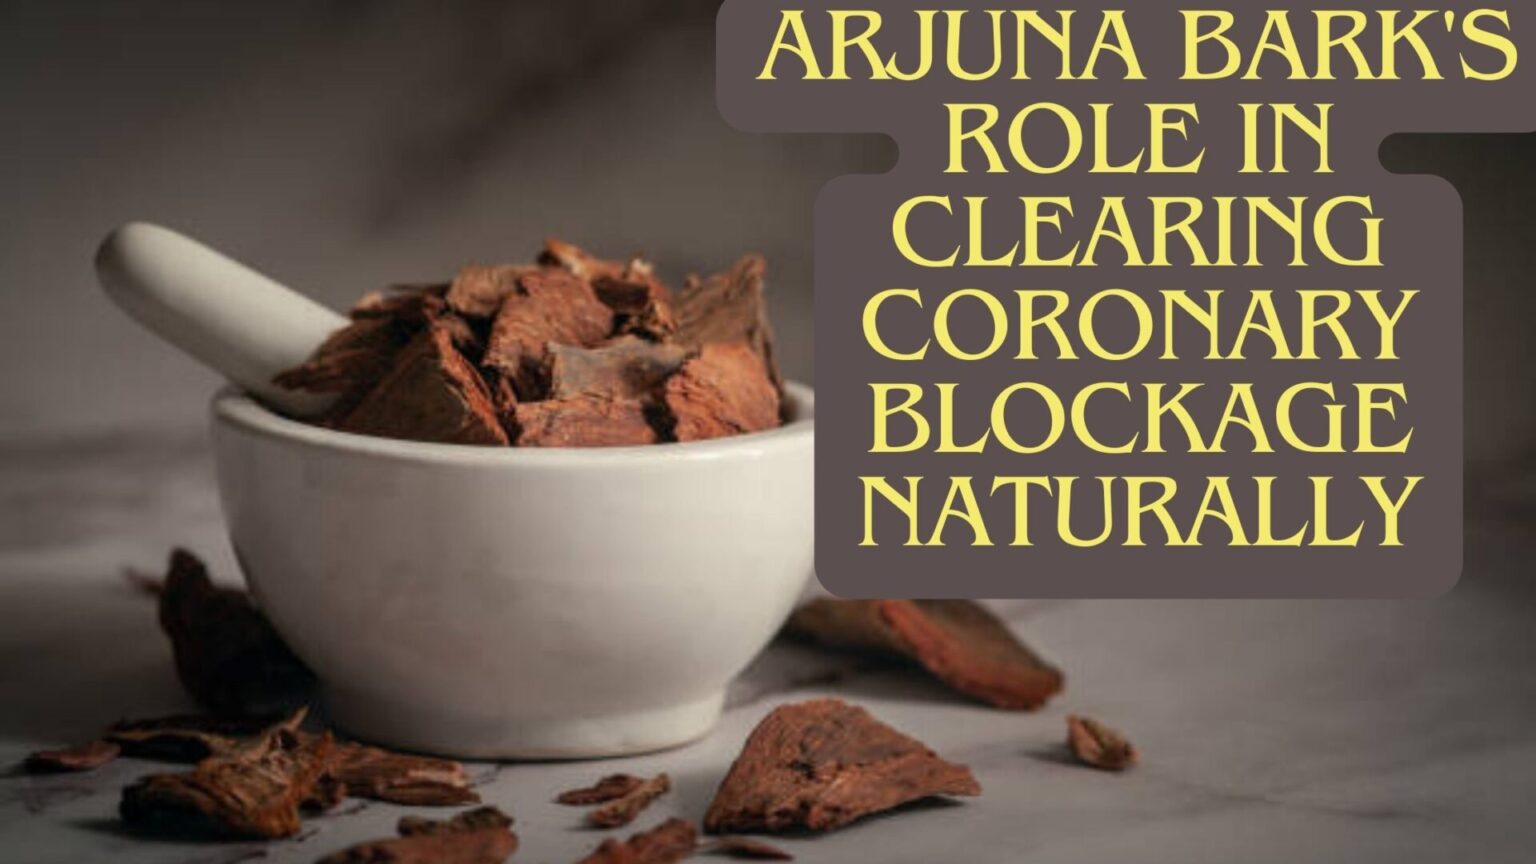 Arjuna Bark's Role in Clearing Coronary Blockage Naturally